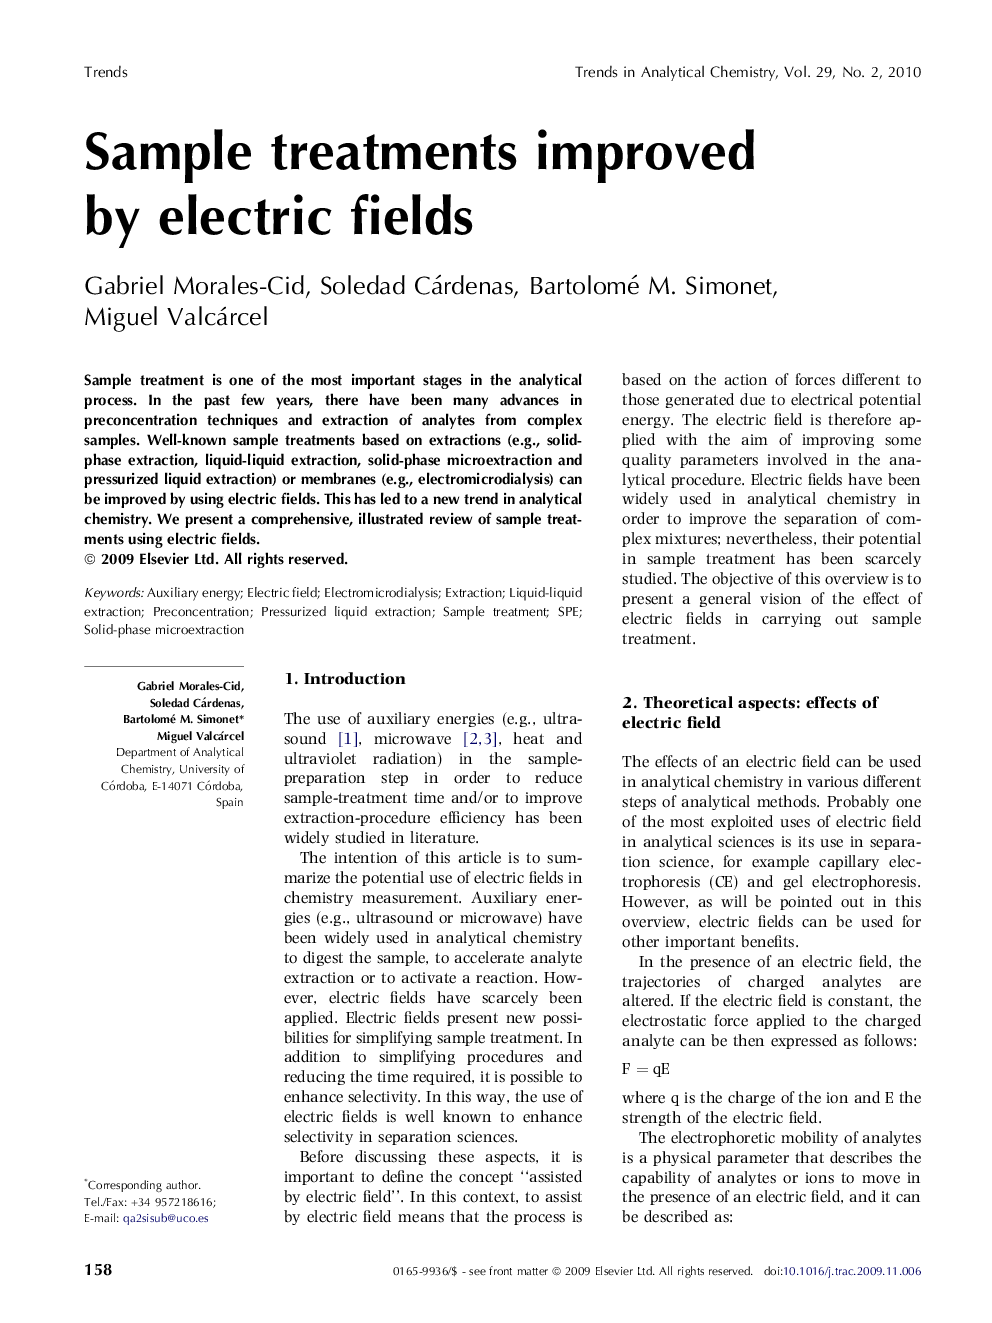 Sample treatments improved by electric fields